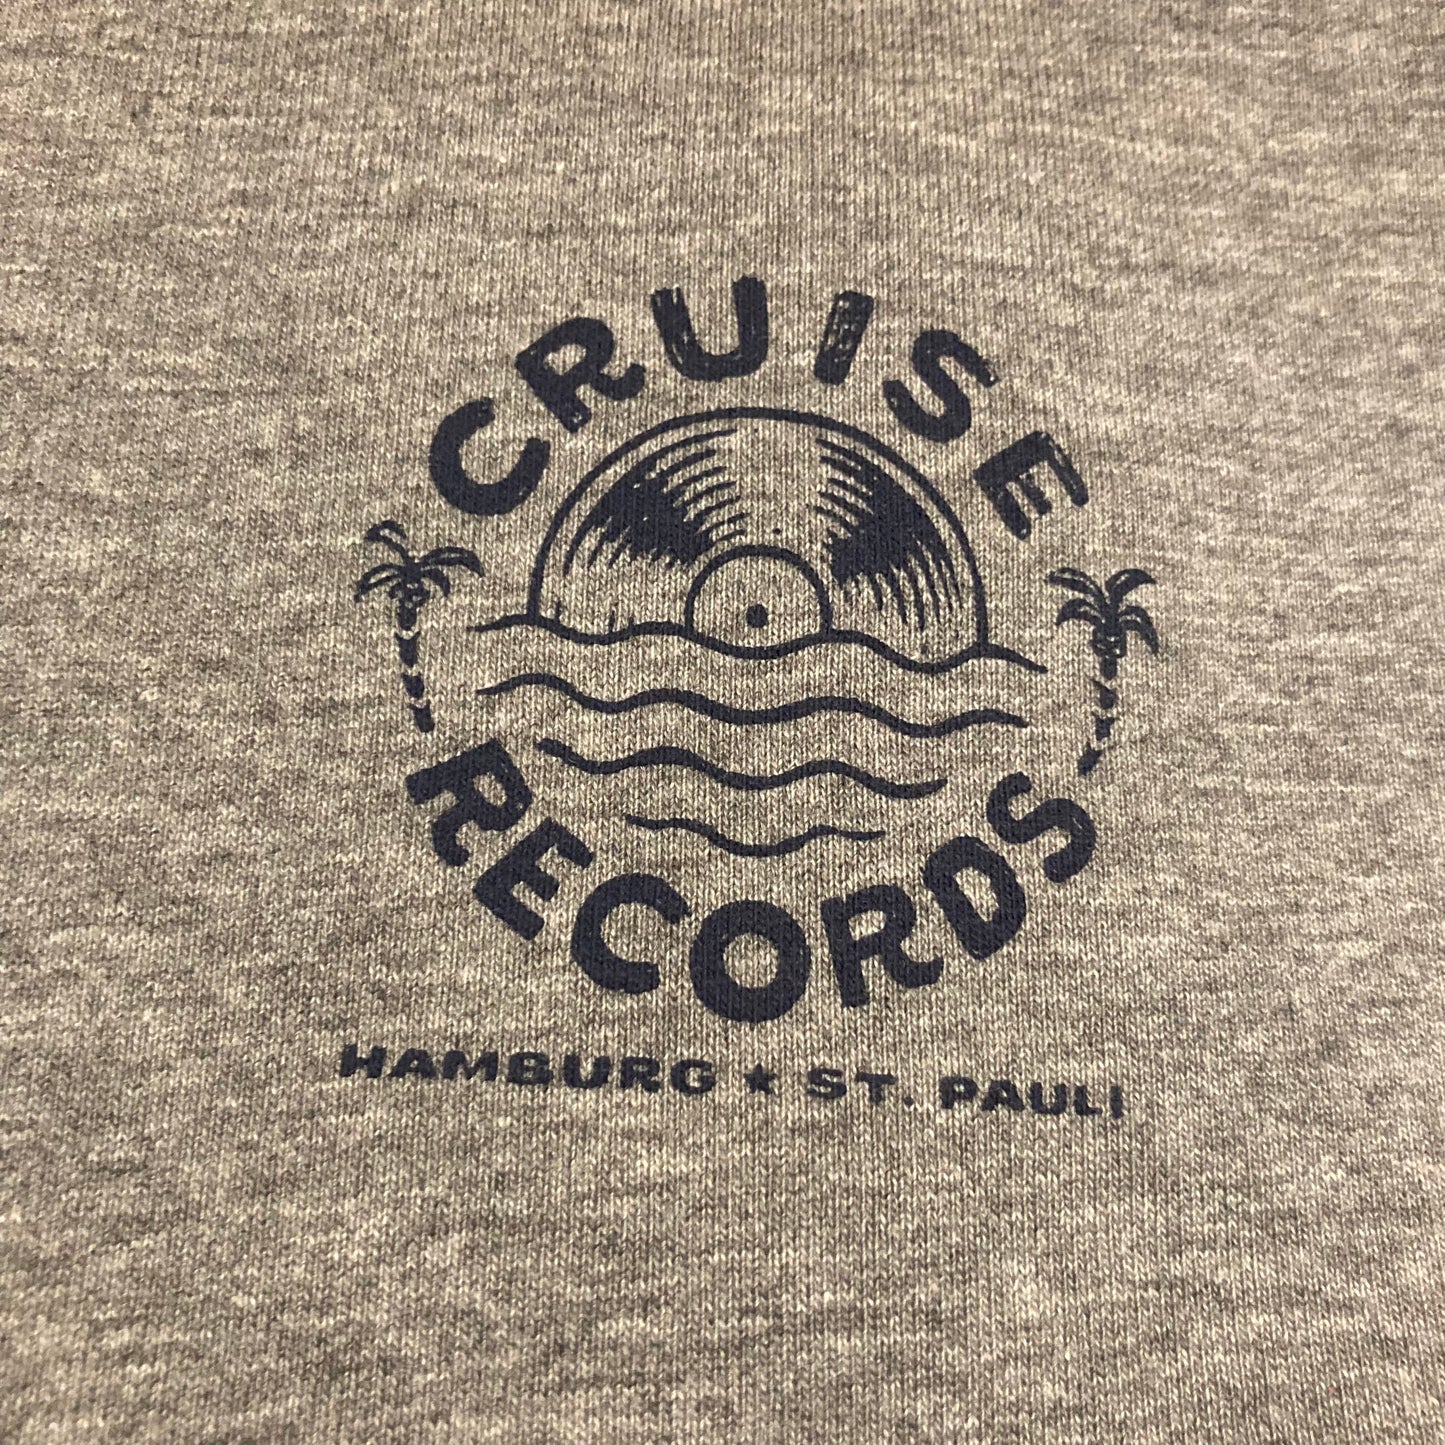 CRUISE RECORDS • Logo • Hoodie • Diverse Colors